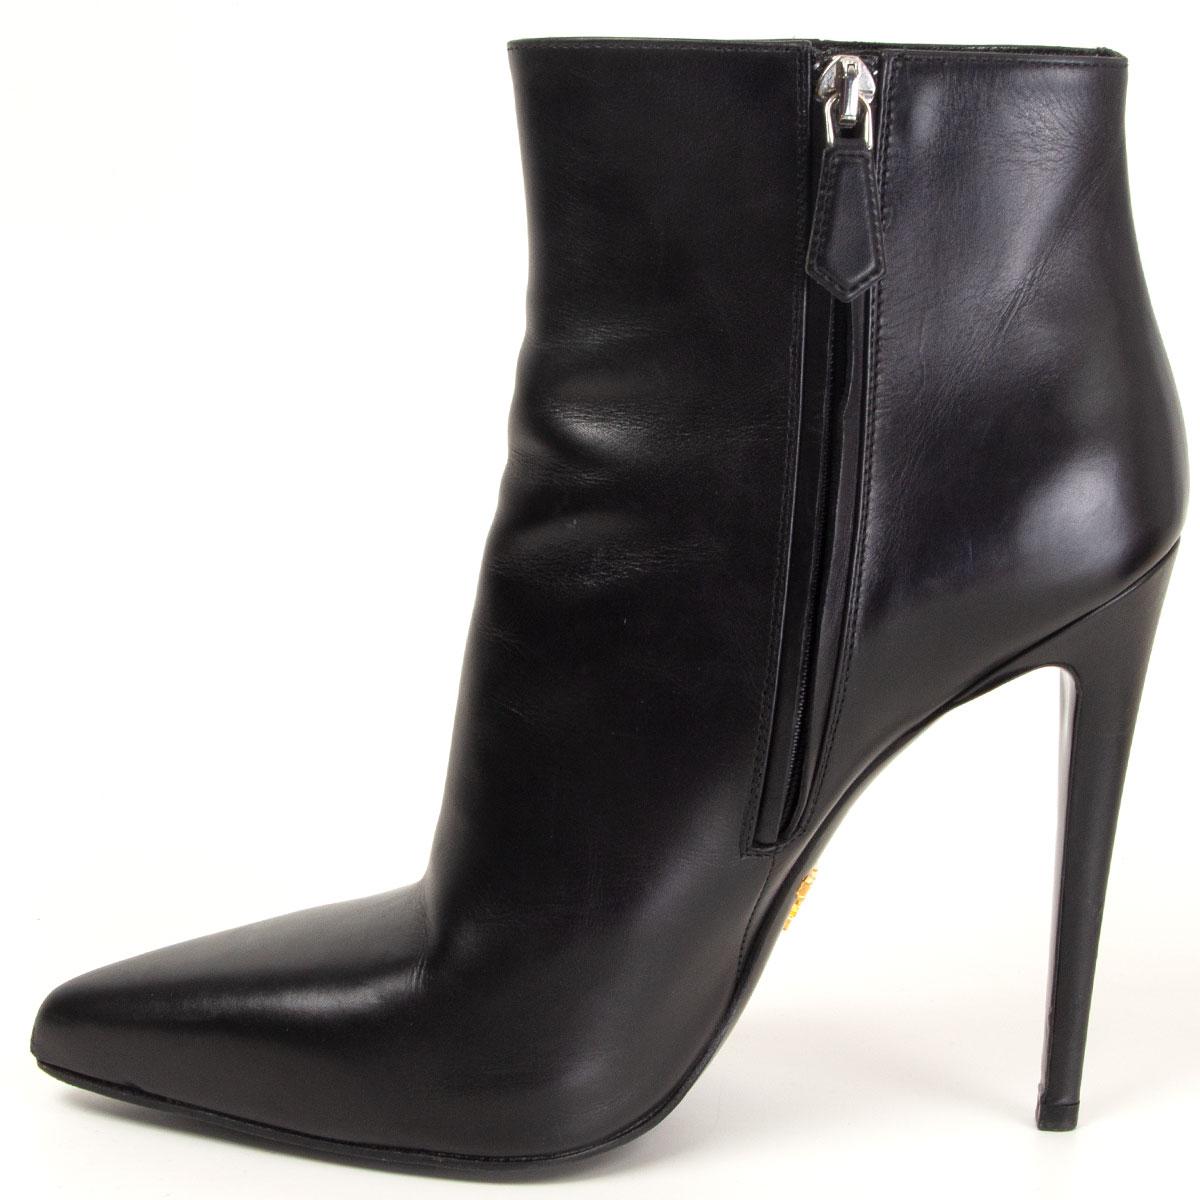 prada pointed toe ankle boots